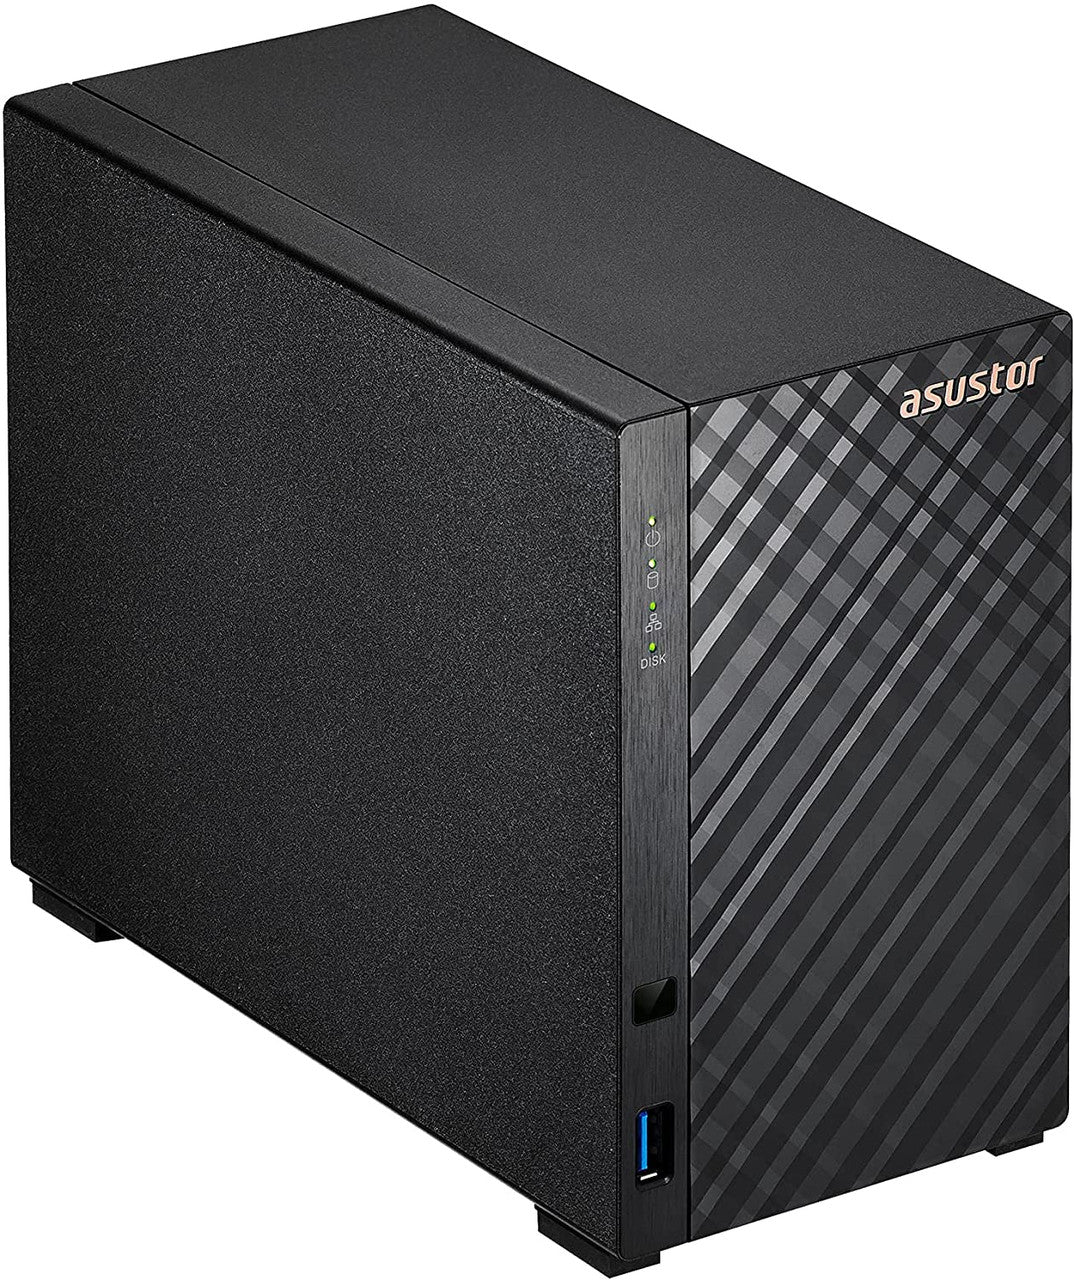 Asustor AS1102T 2-Bay Drivestor 2 NAS with 1GB RAM and 8TB (2x4TB) Western Digital RED Plus Drives